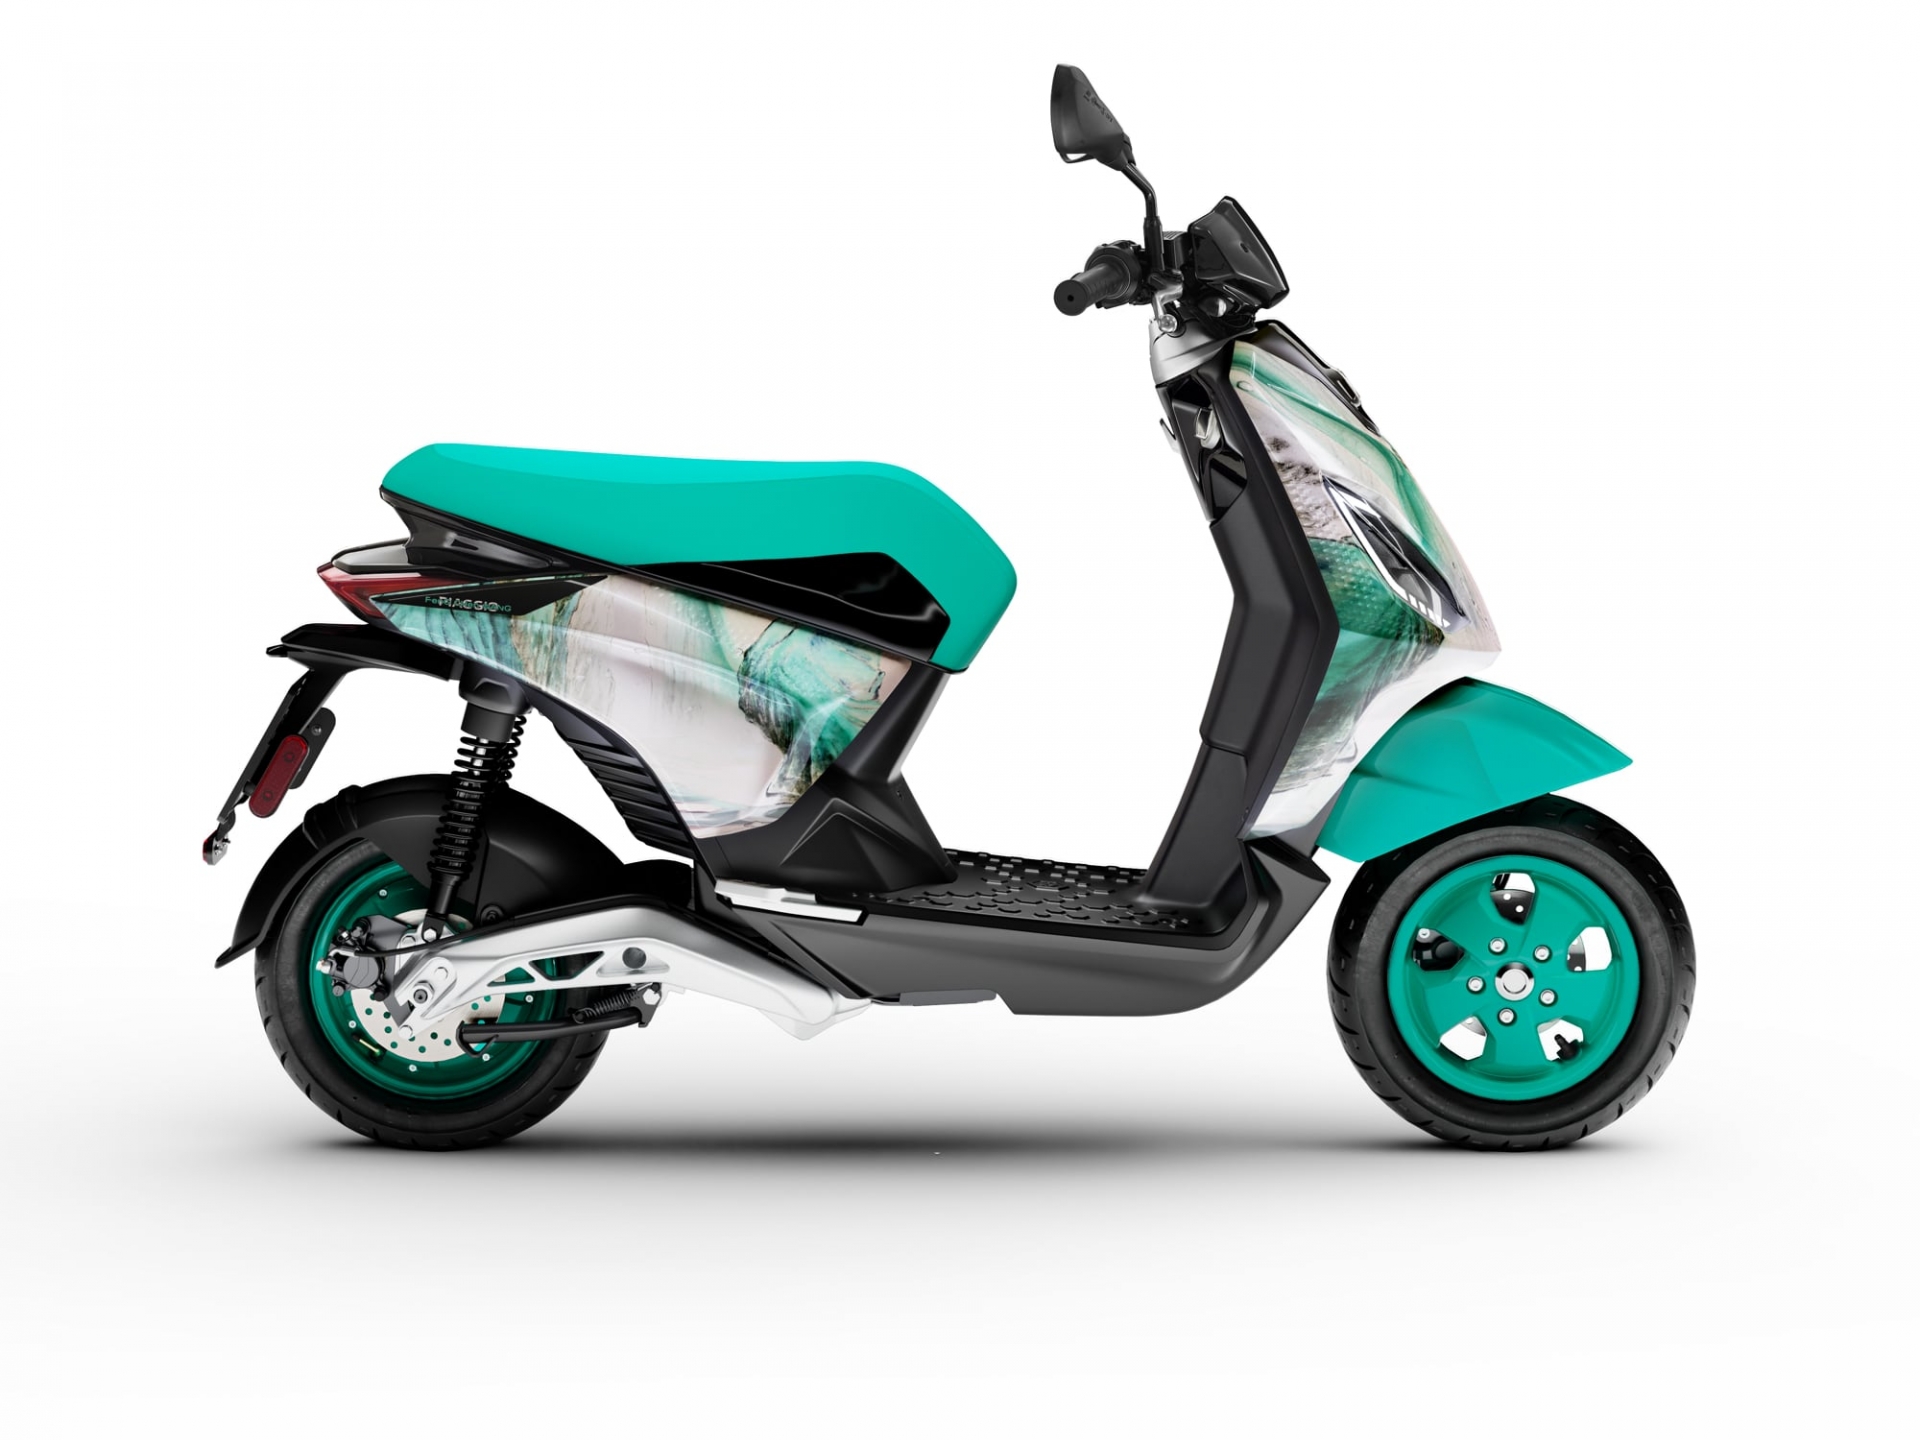 Piaggio's new electric car model launched with extremely strange colors, priced at the same price as Honda SH 125i 4